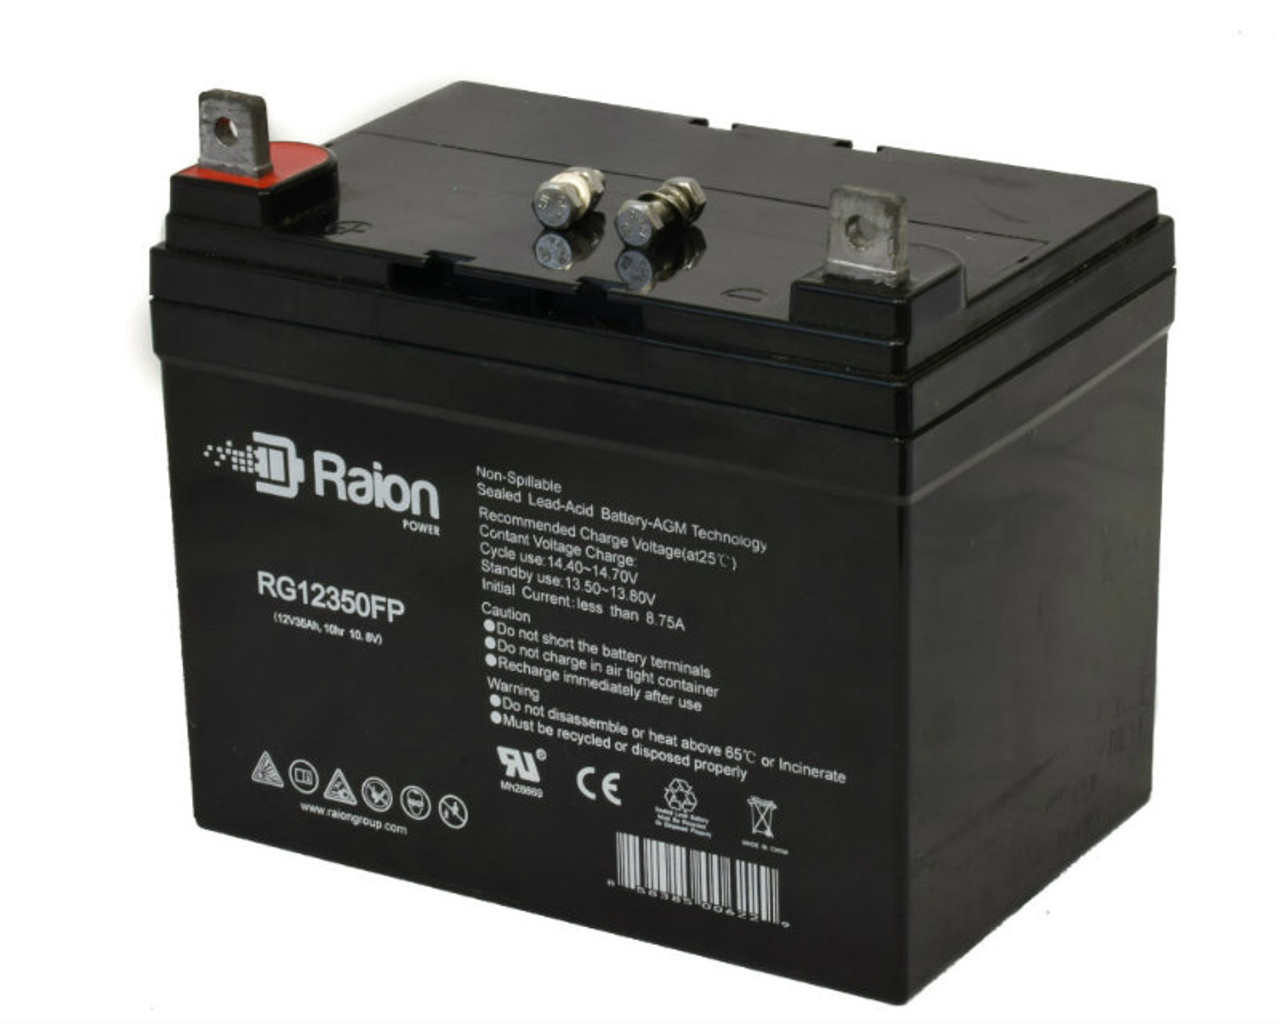 Raion Power Replacement 12V 35Ah RG12350FP Battery for Ingersoll Equipment 3010